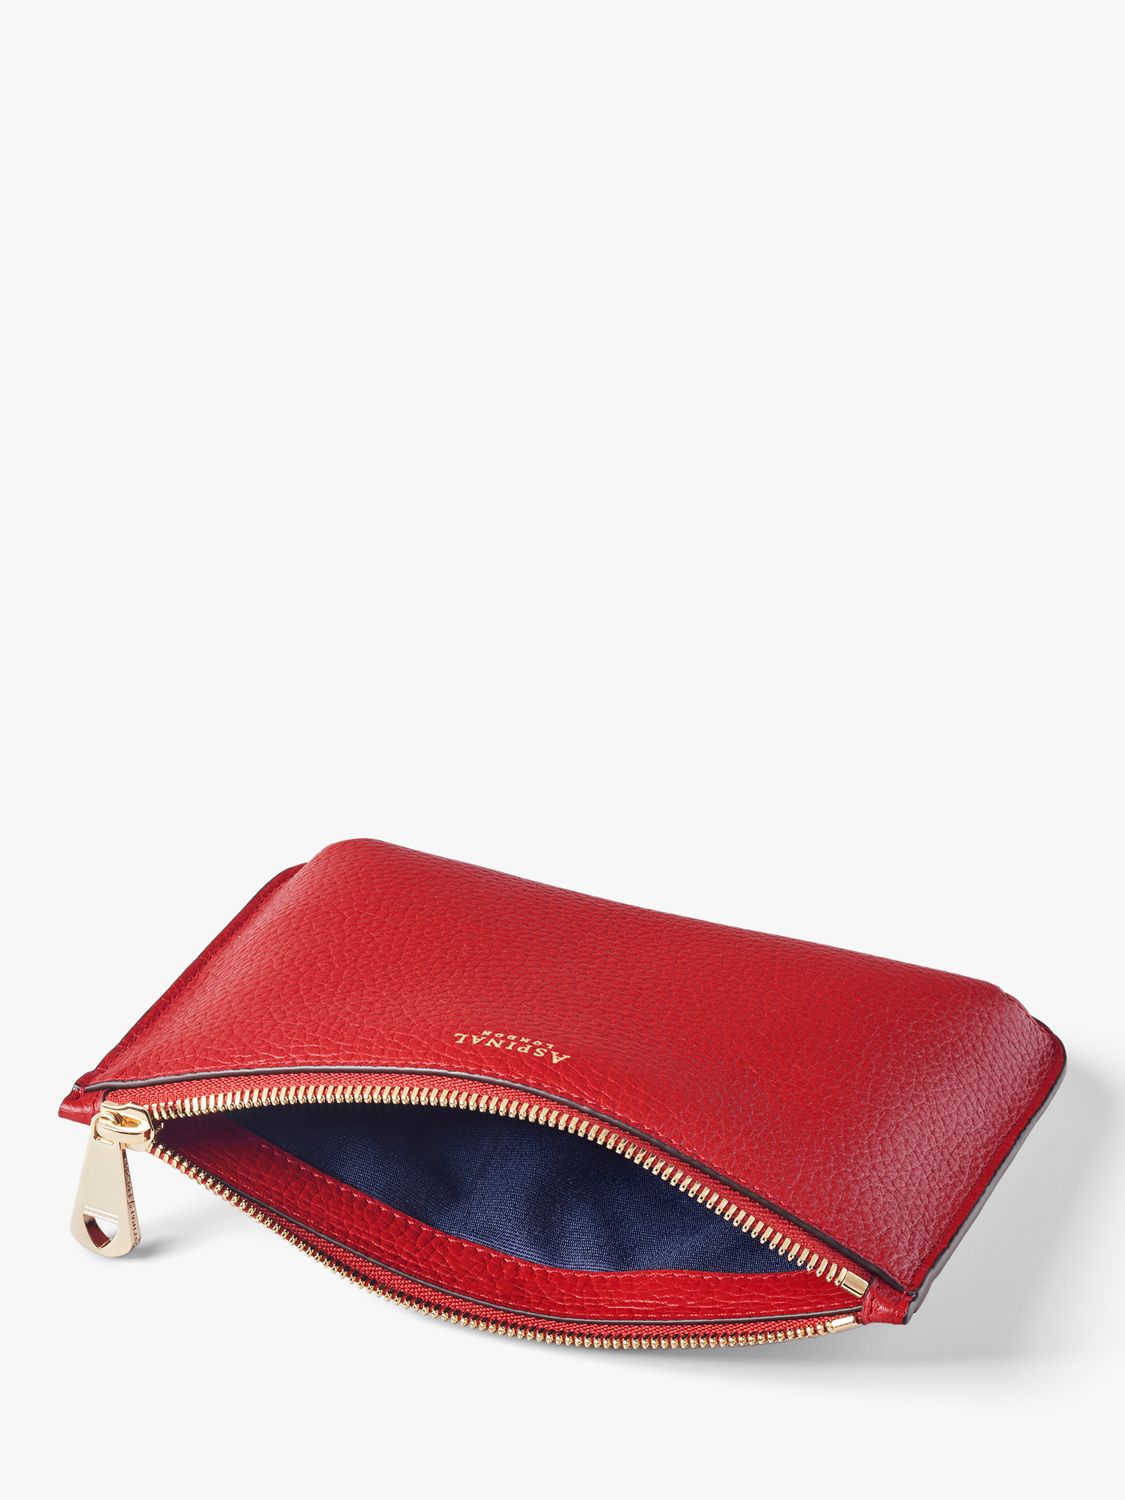 Aspinal of London Medium Ella Pebble Grain Leather Pouch, Cardinal Red